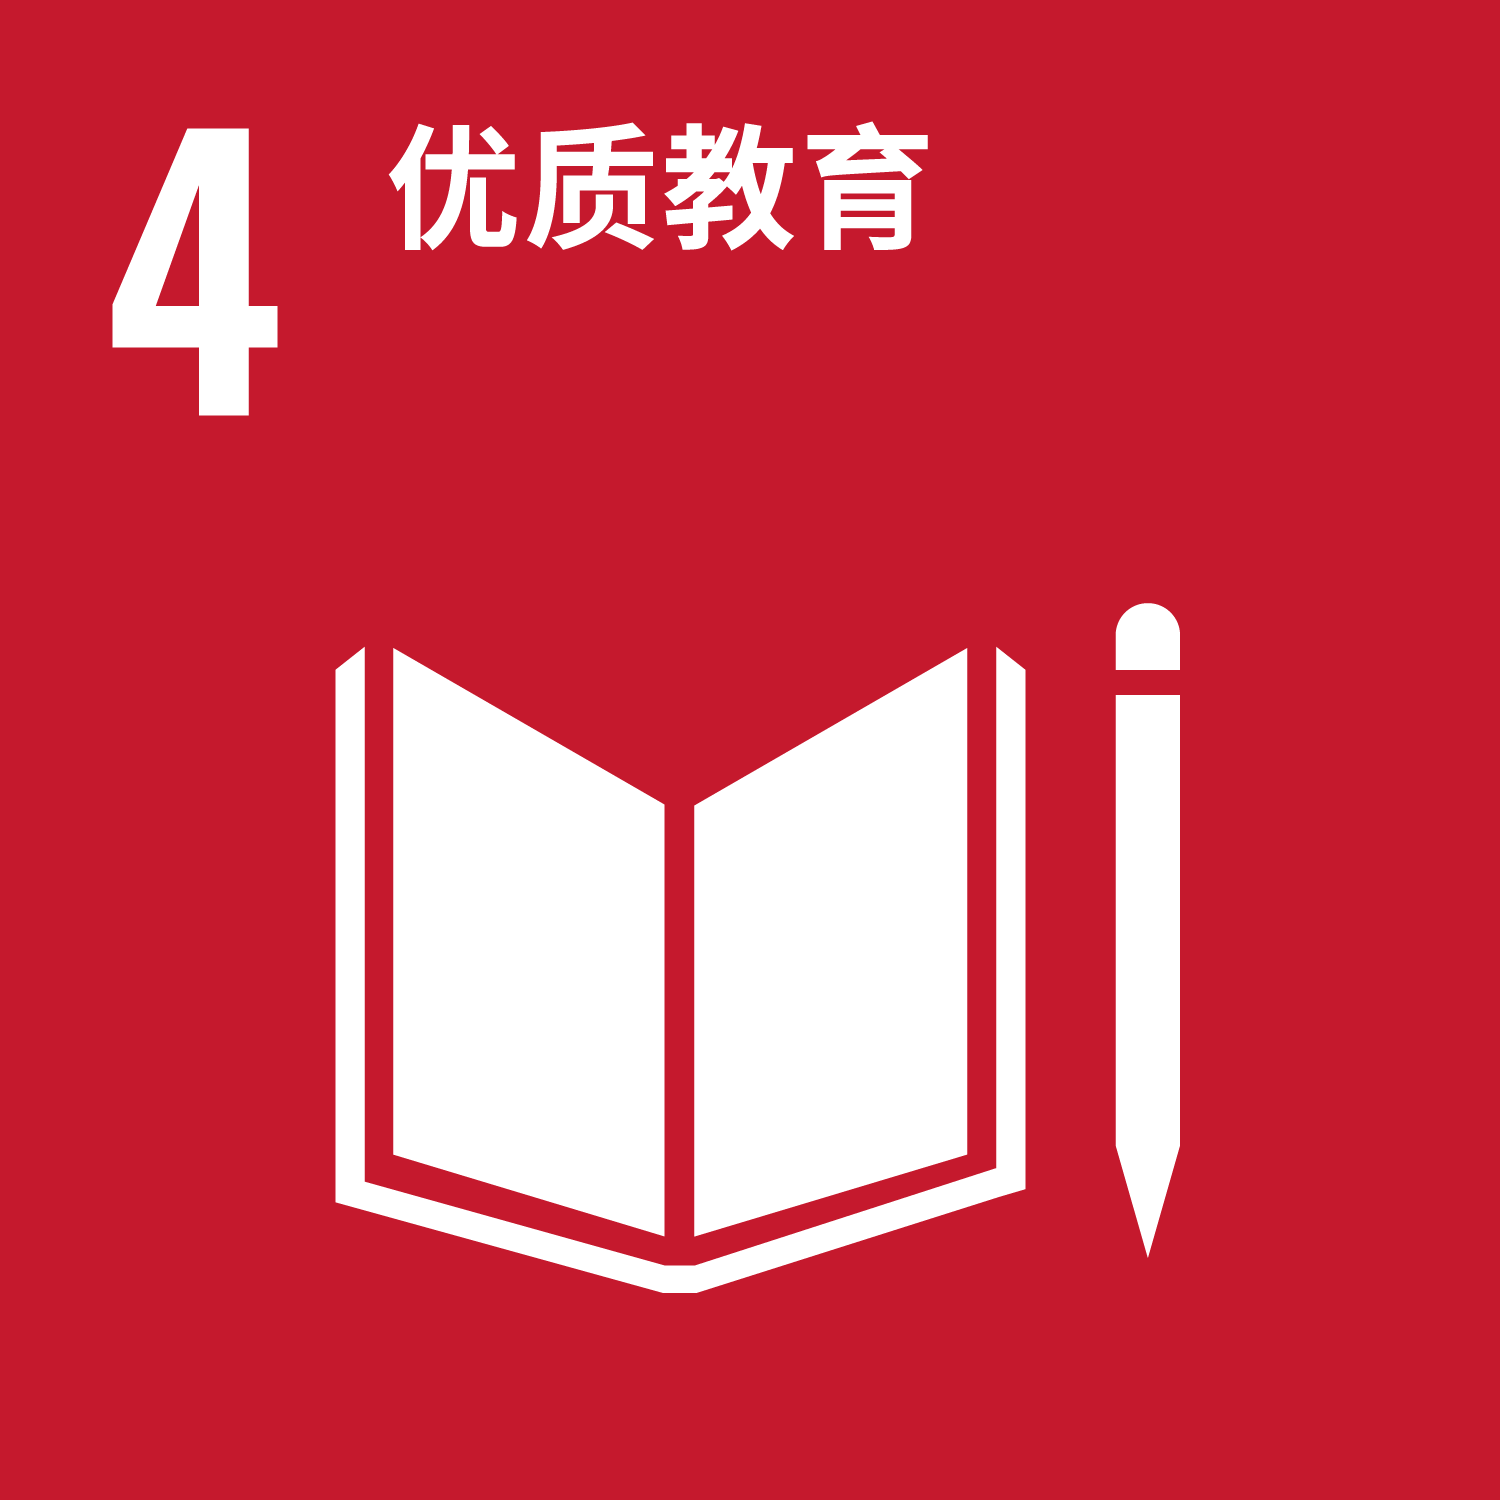 global commitment icon